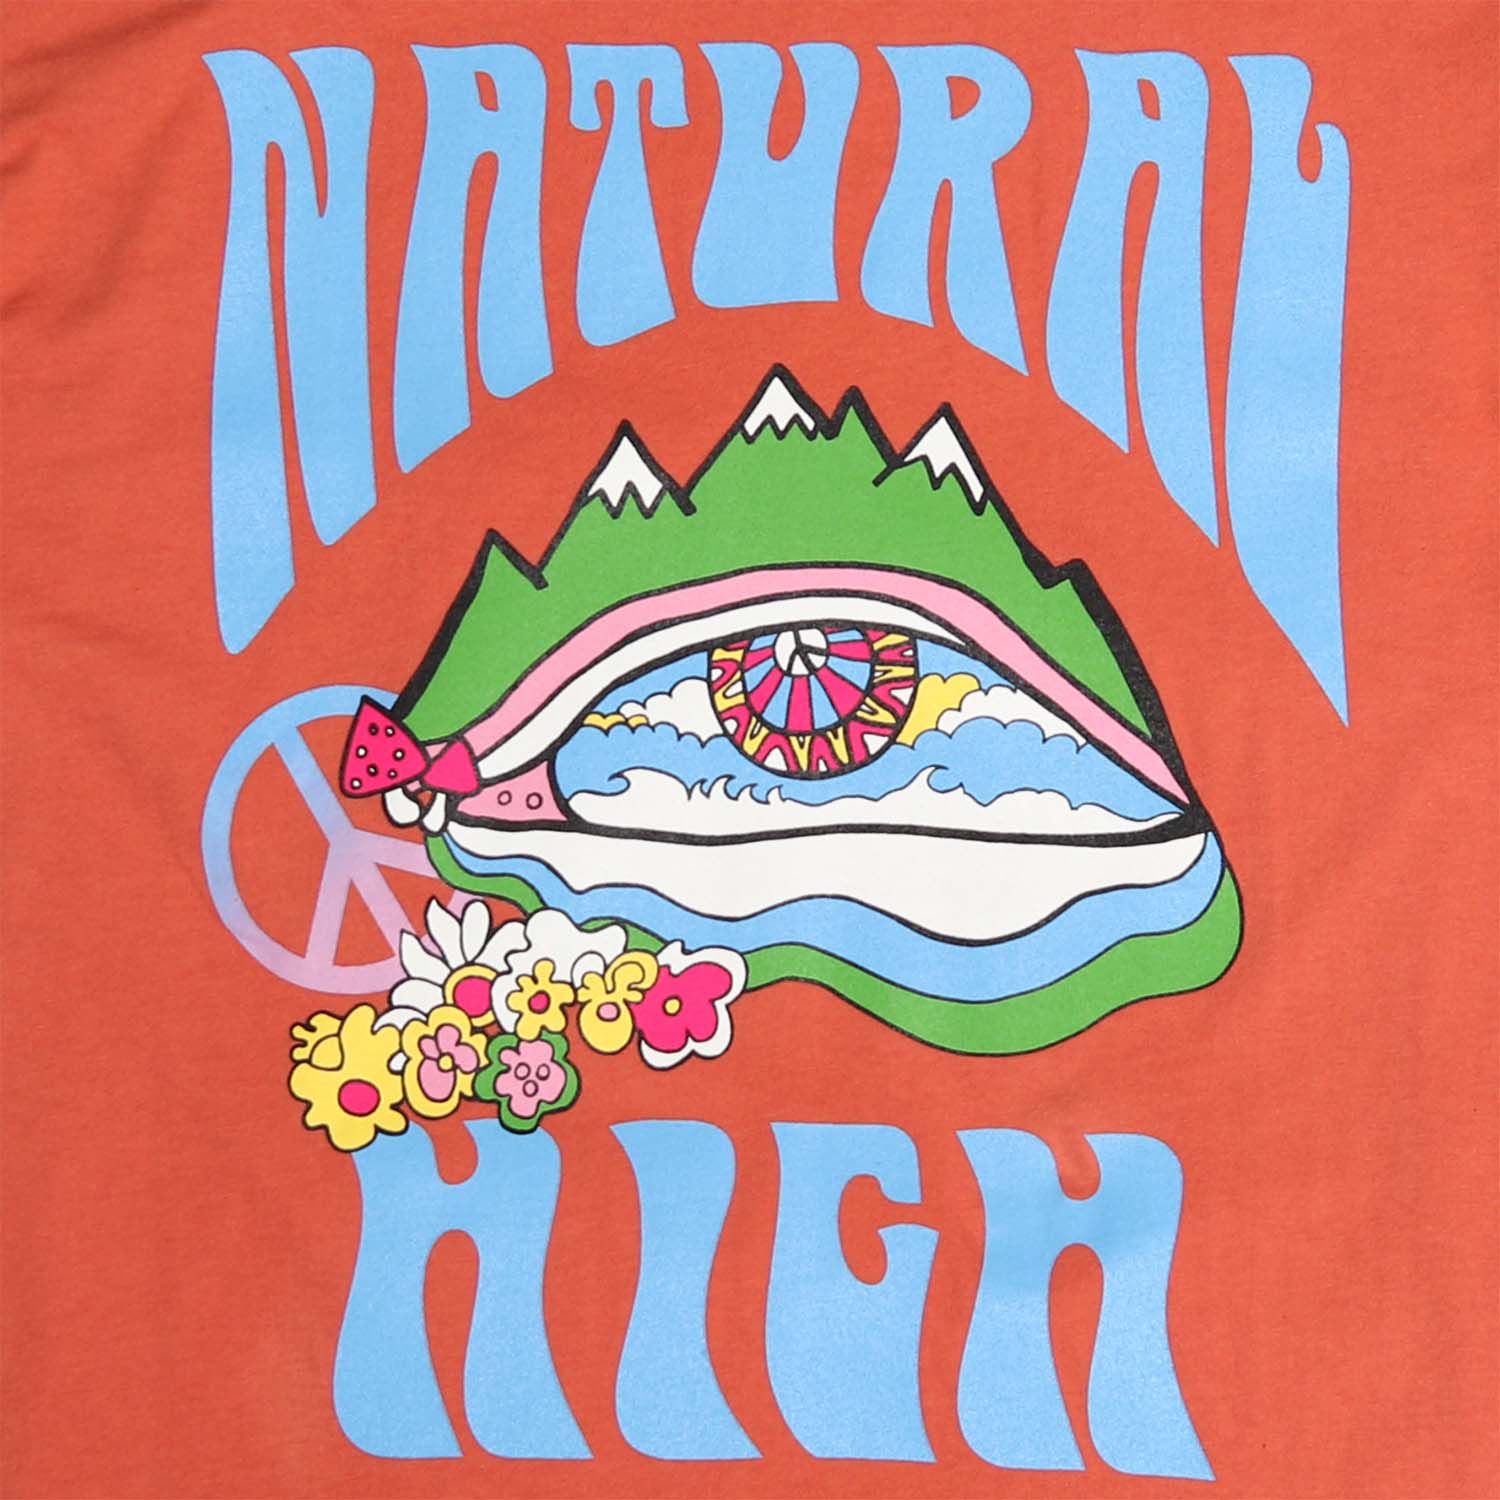 Natural High graphic tee